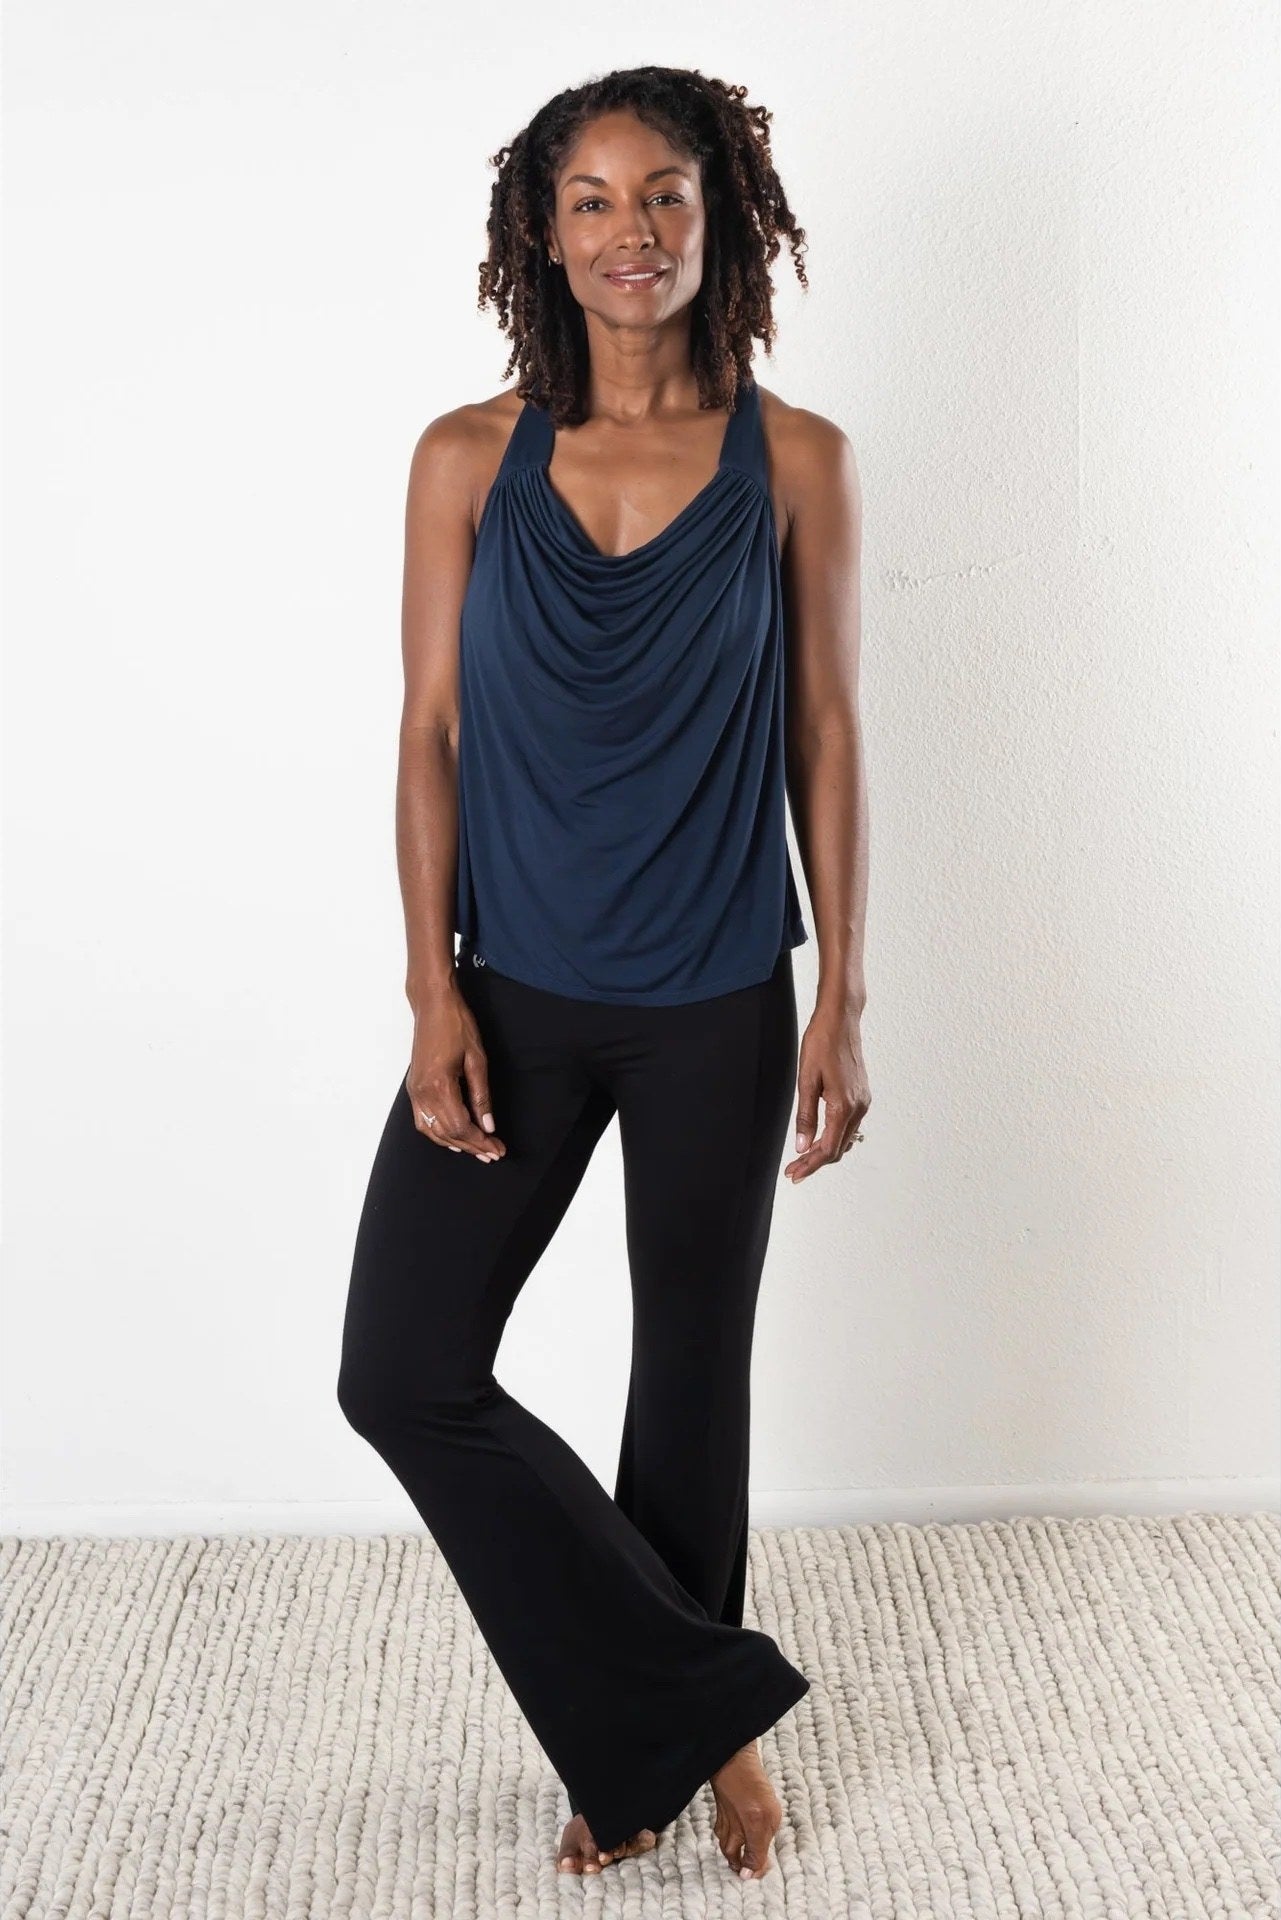 A model wearing black pants and blue top